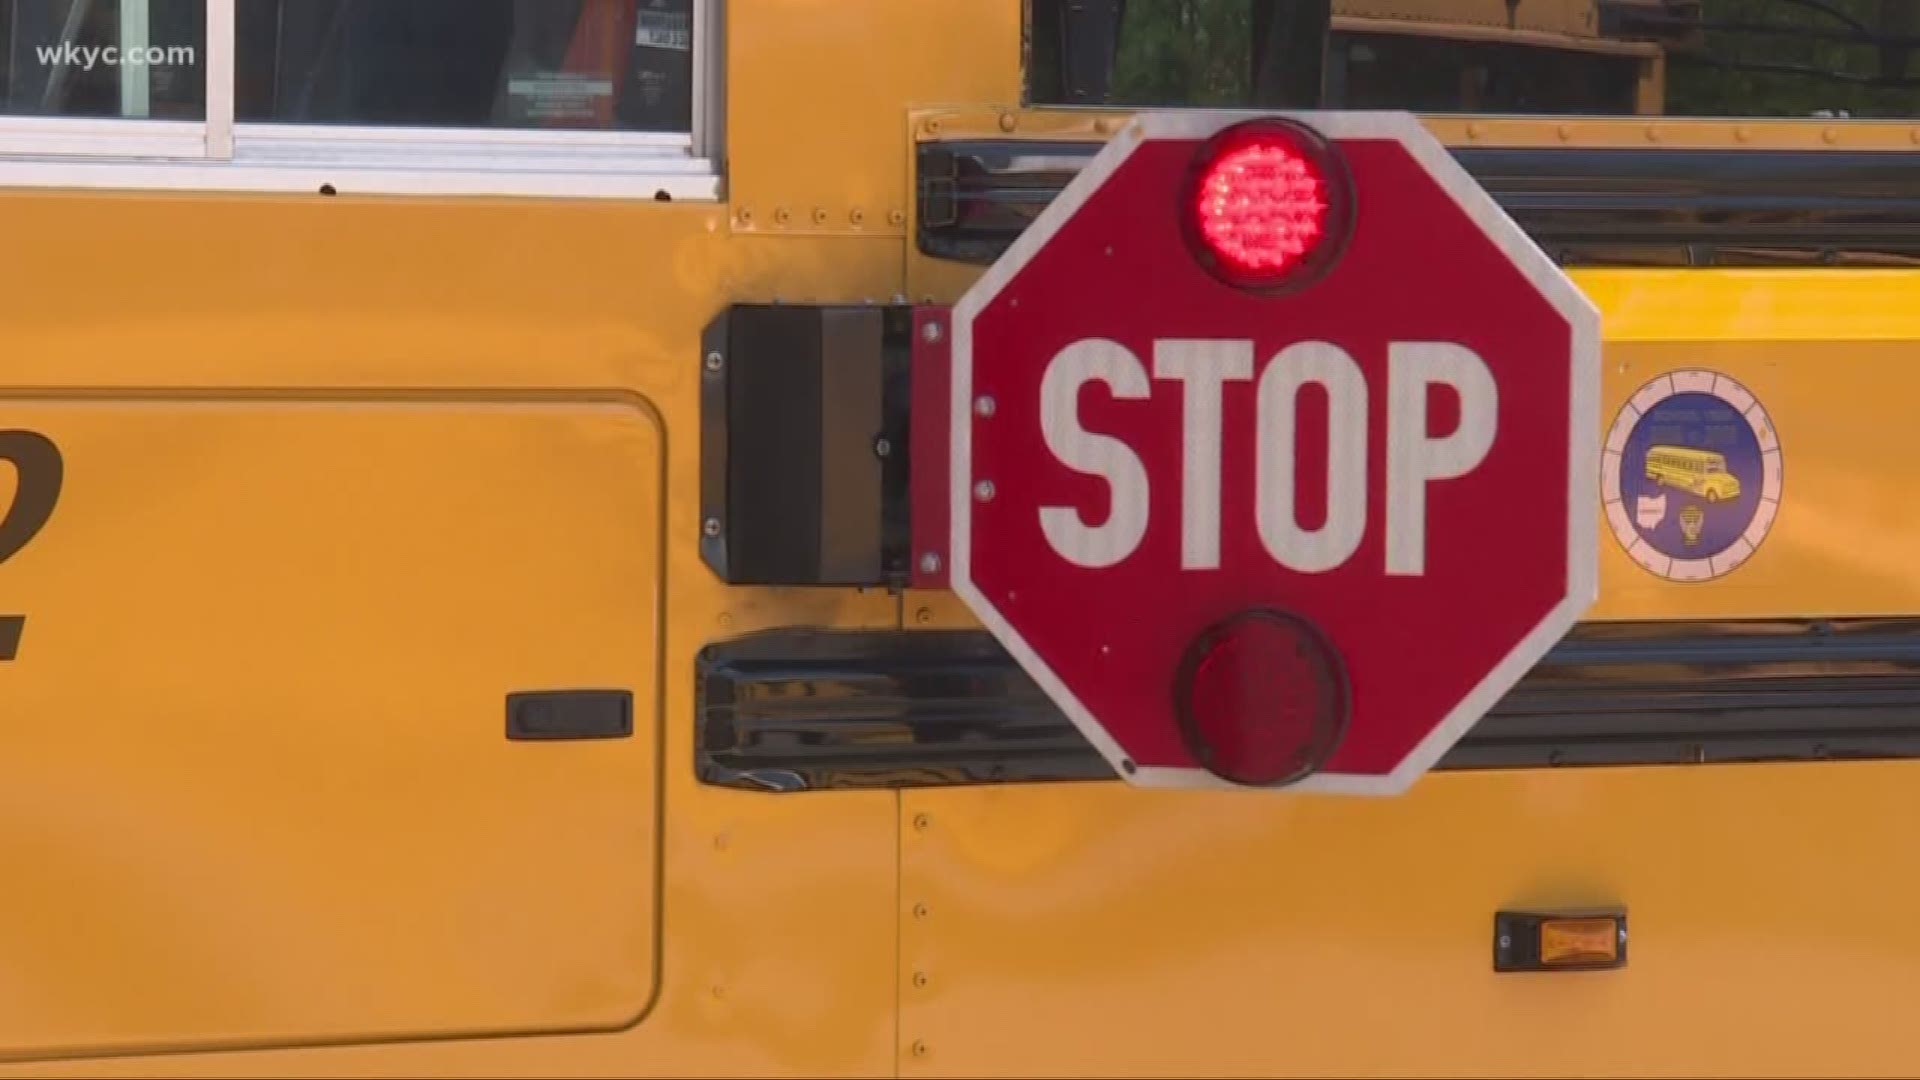 Ohio laws are different than other states when it comes to school buses on the roads. Is it ever legal to pass a school bus? Our 'road warrior' Danielle Wiggins breaks down the rules.